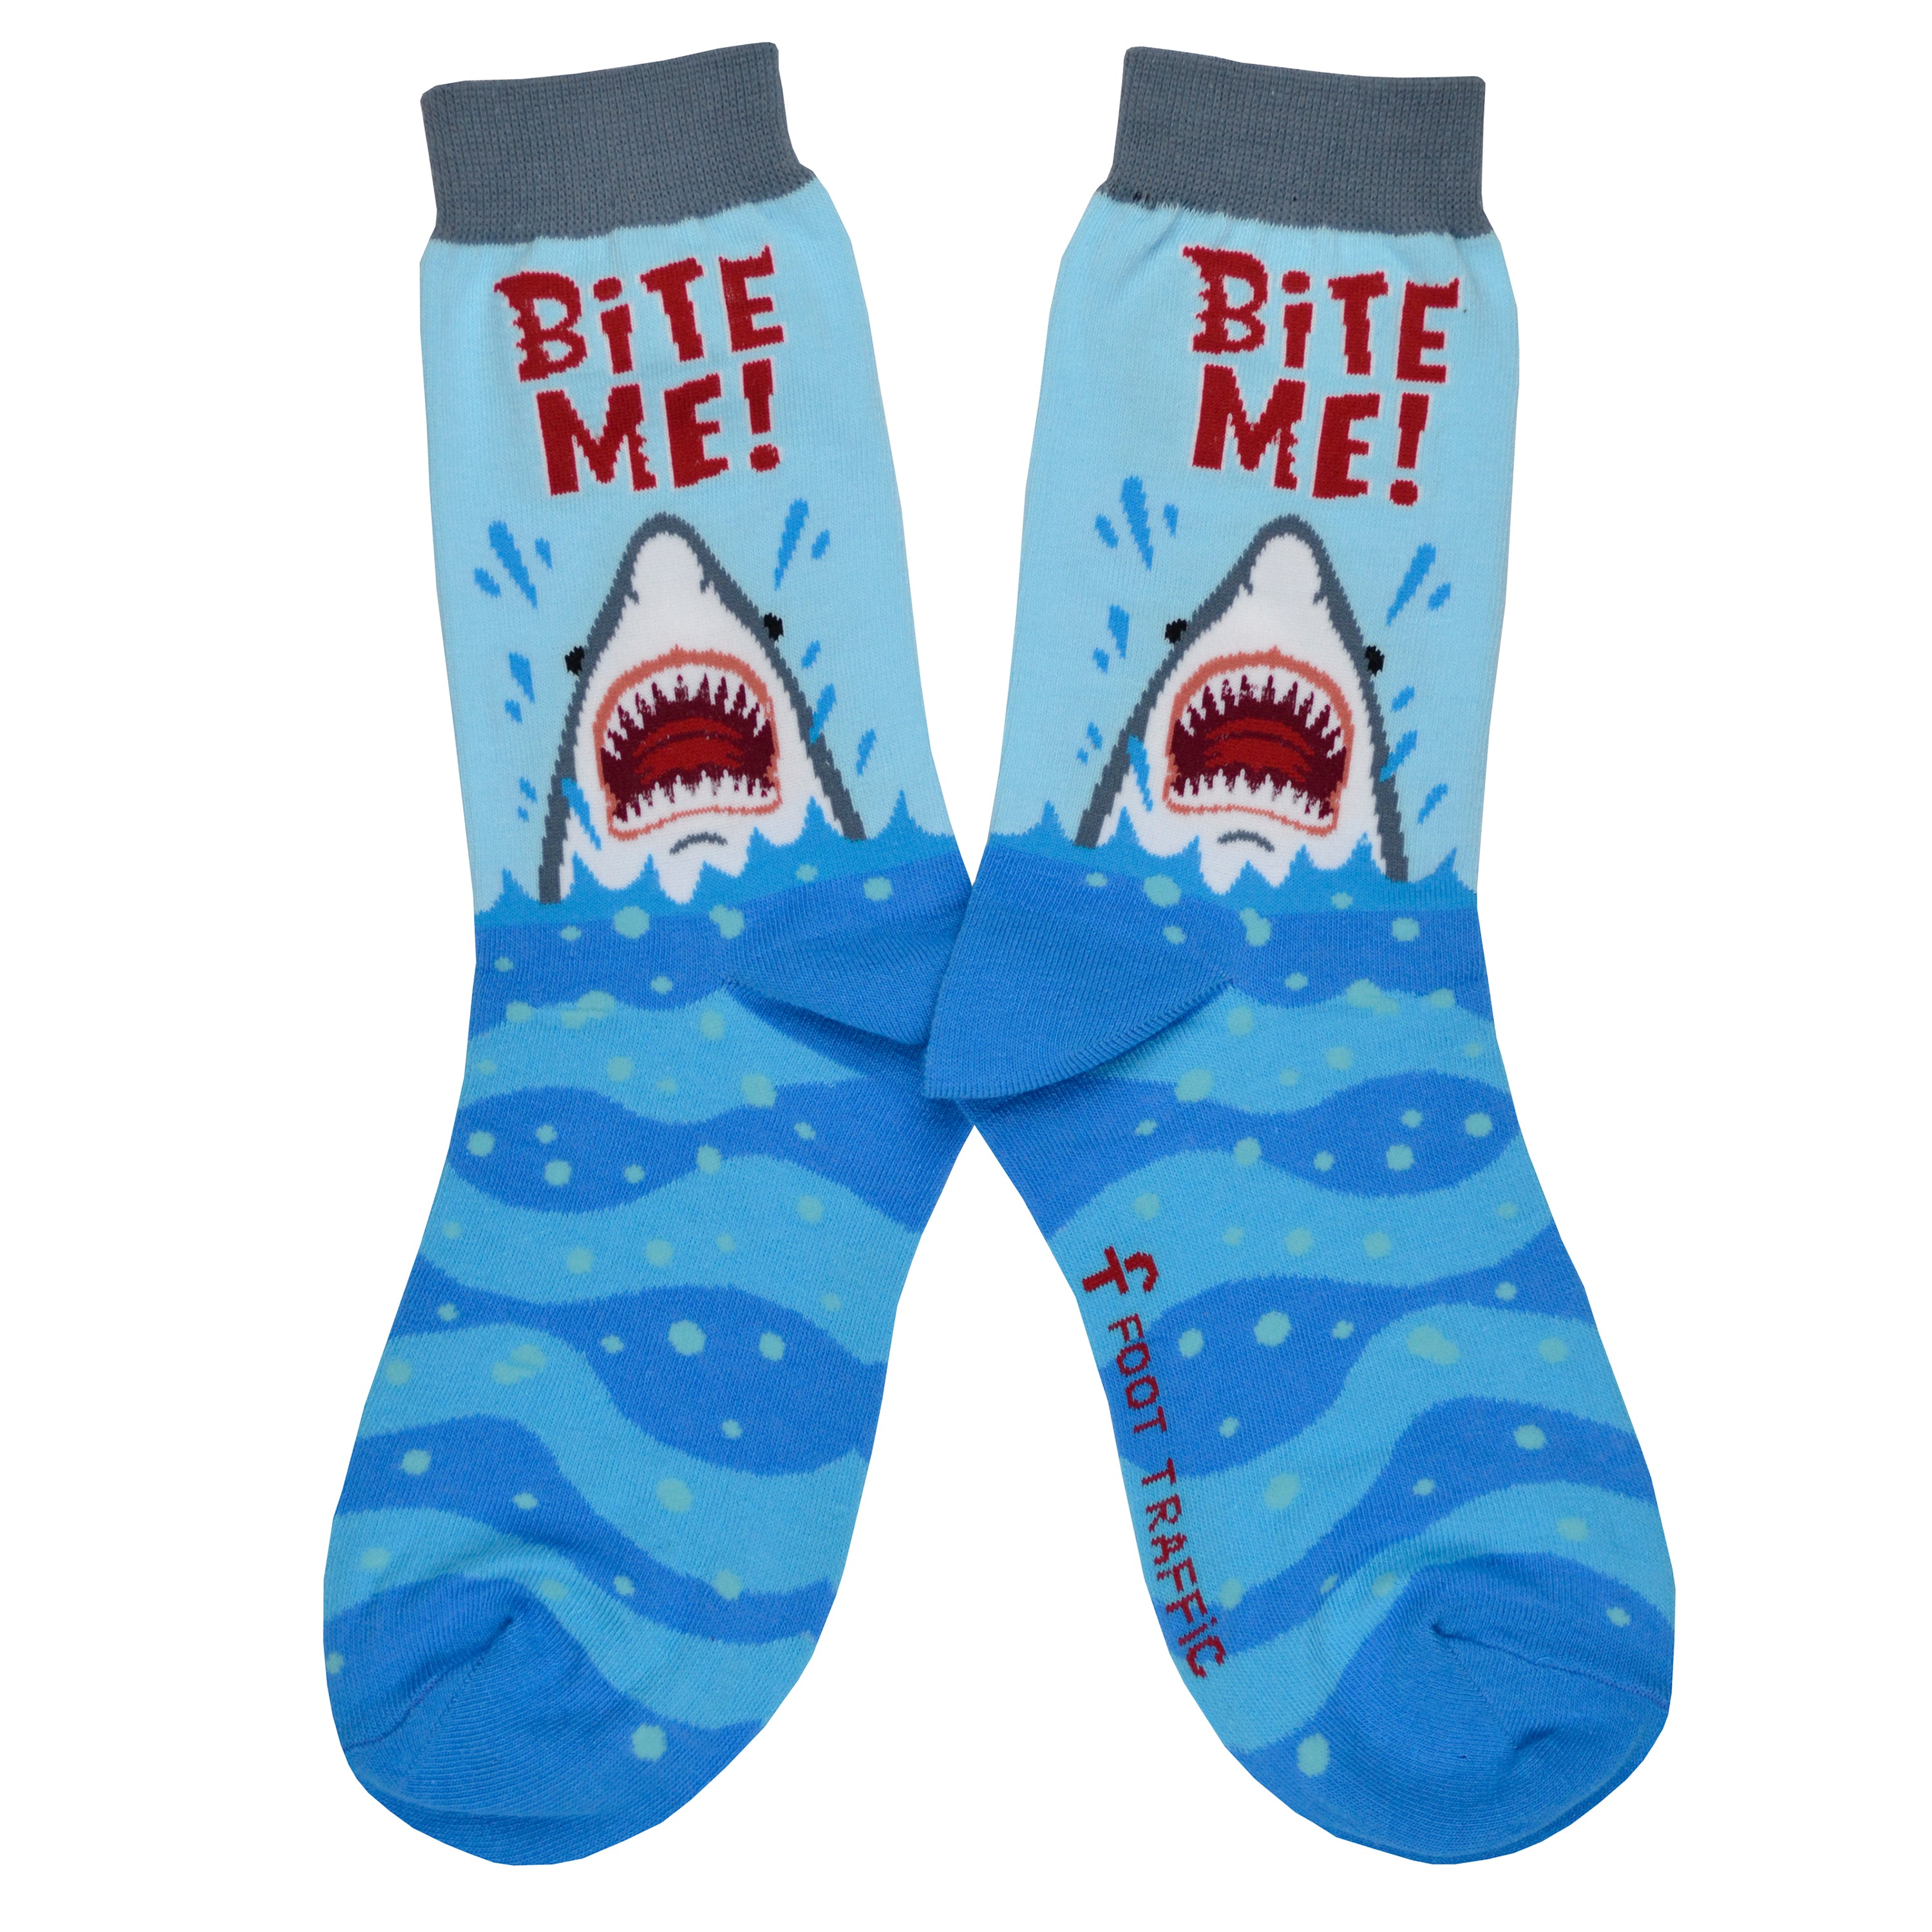 Shown in a flatlay, a pair of women's Foot Traffic brand cotton crew socks in blue with a grey cuff and blue heel and toe. The leg of the sock features a great white shark poised to bite with the words 